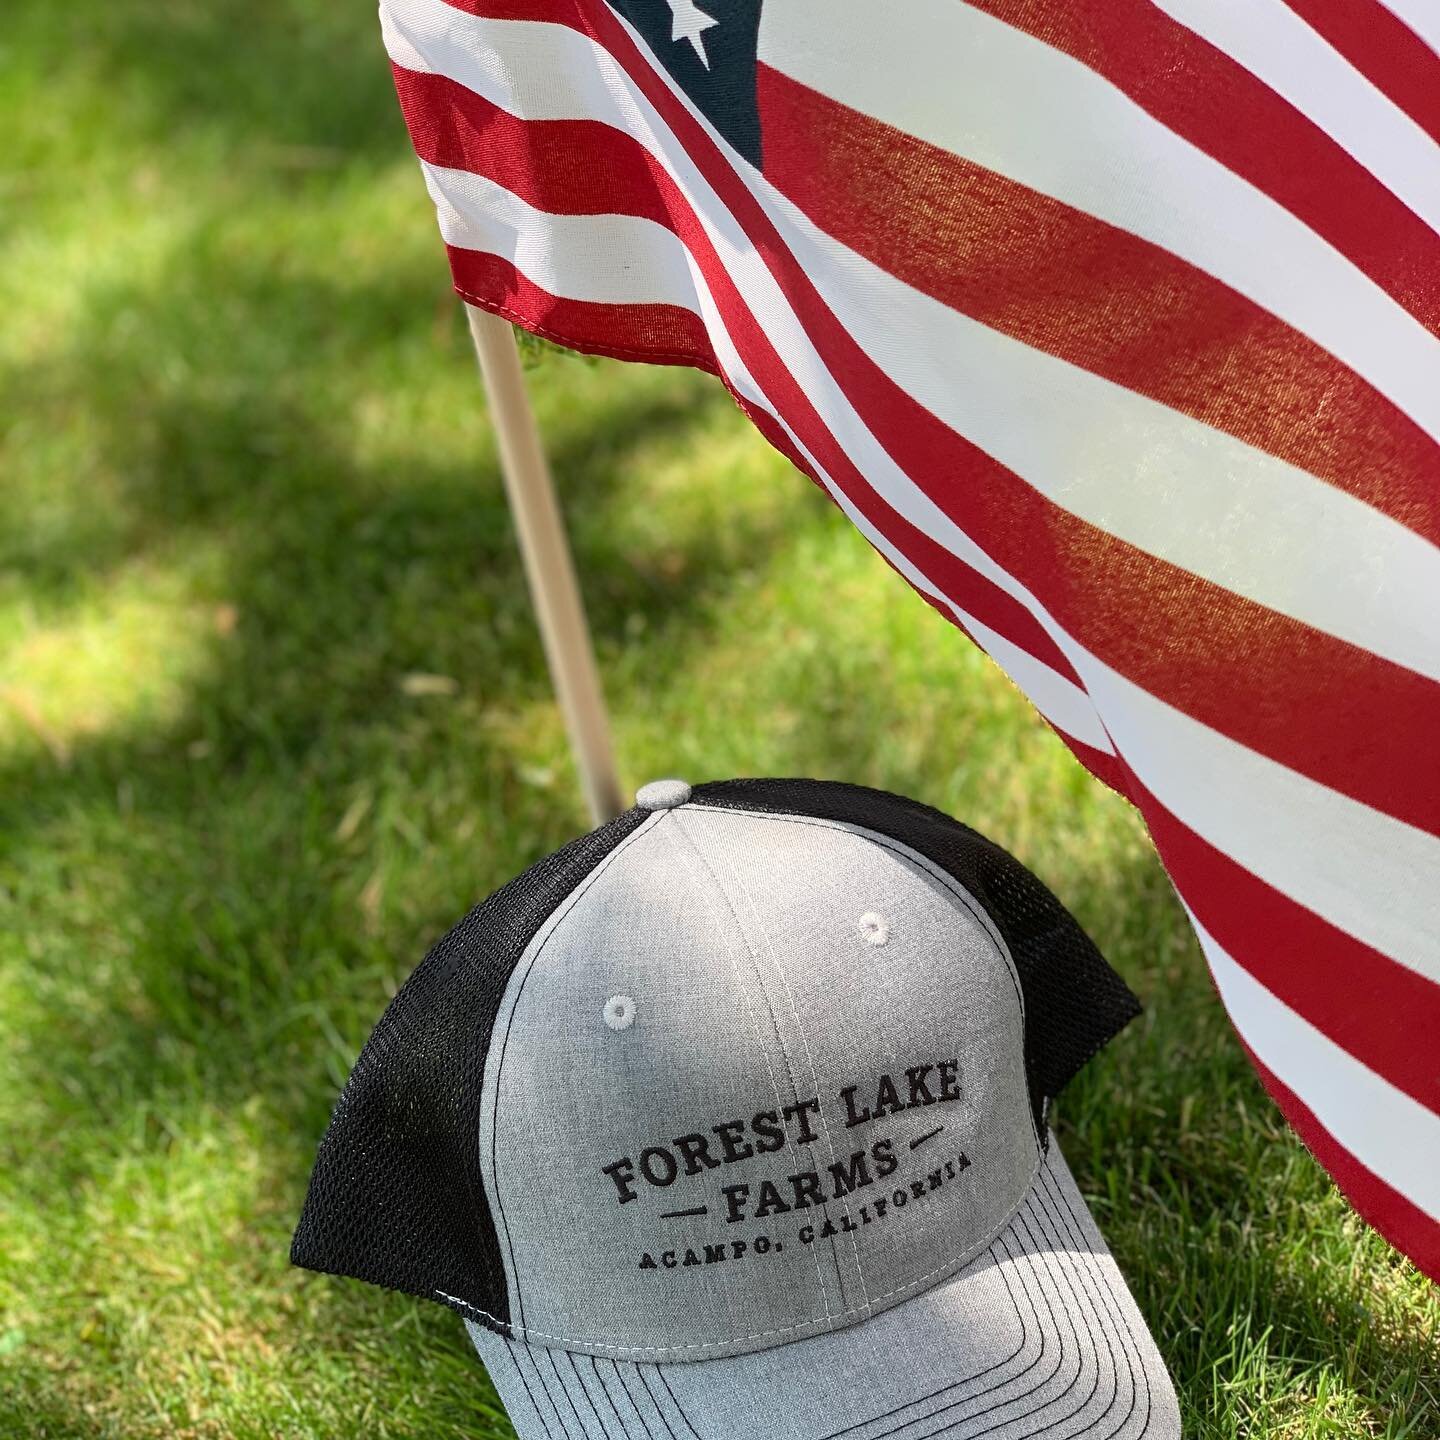 Free Hat Giveaway!! 🧢 Follow our page and share this post on your story for a chance to win. We&rsquo;ll select one winner at random July 14th. Good luck! 🇺🇸 

#giveaway #giveawaycontest #freehat #promo #beef #july4th